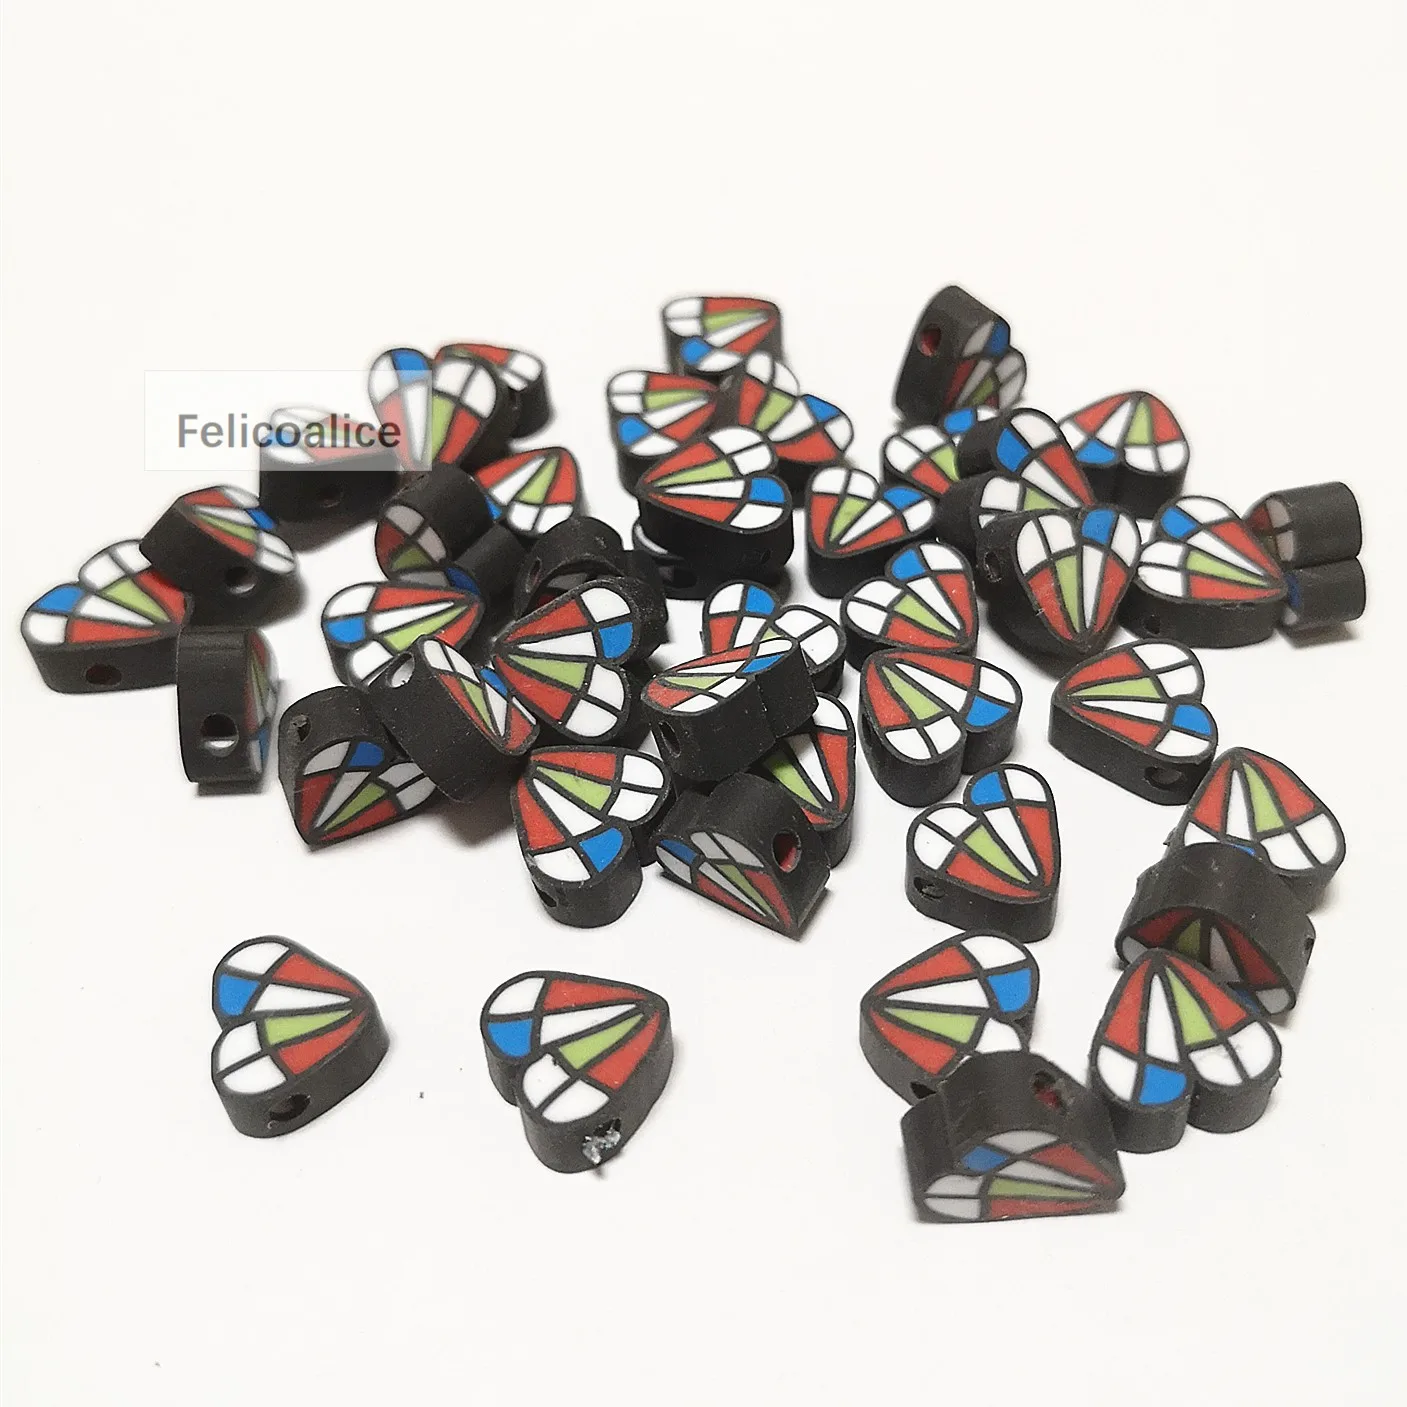 

40pcs 10mm Fashion Beautiful Colorful Diamond Shaped Polymer Clay Spacer Beads For Jewelry Making DIY Handmade Accessories